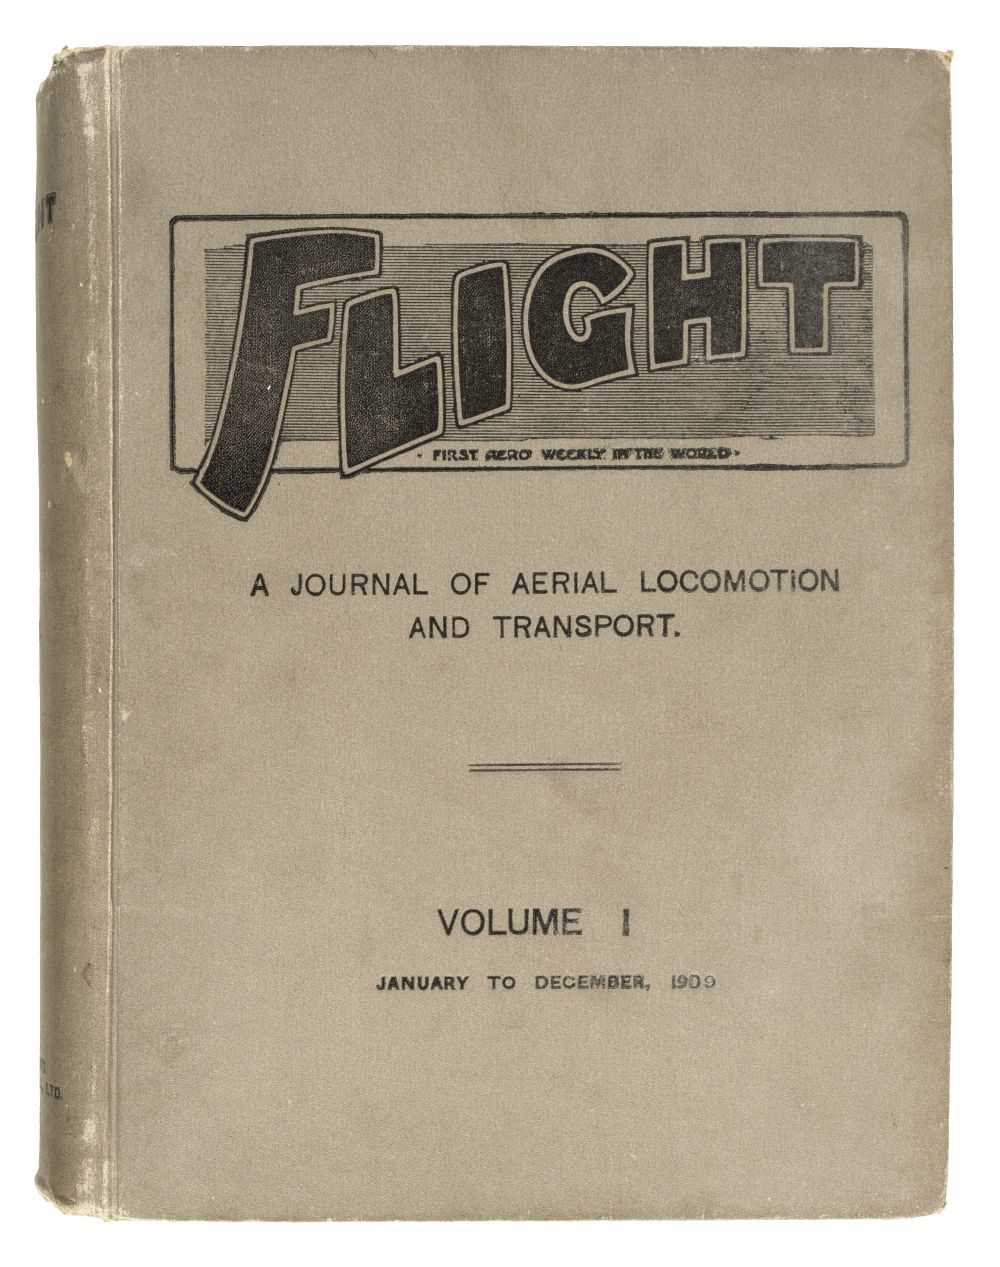 Lot 378 - Flight.  First Aero Weekly in the World, vols. 1-7, 1909-1915